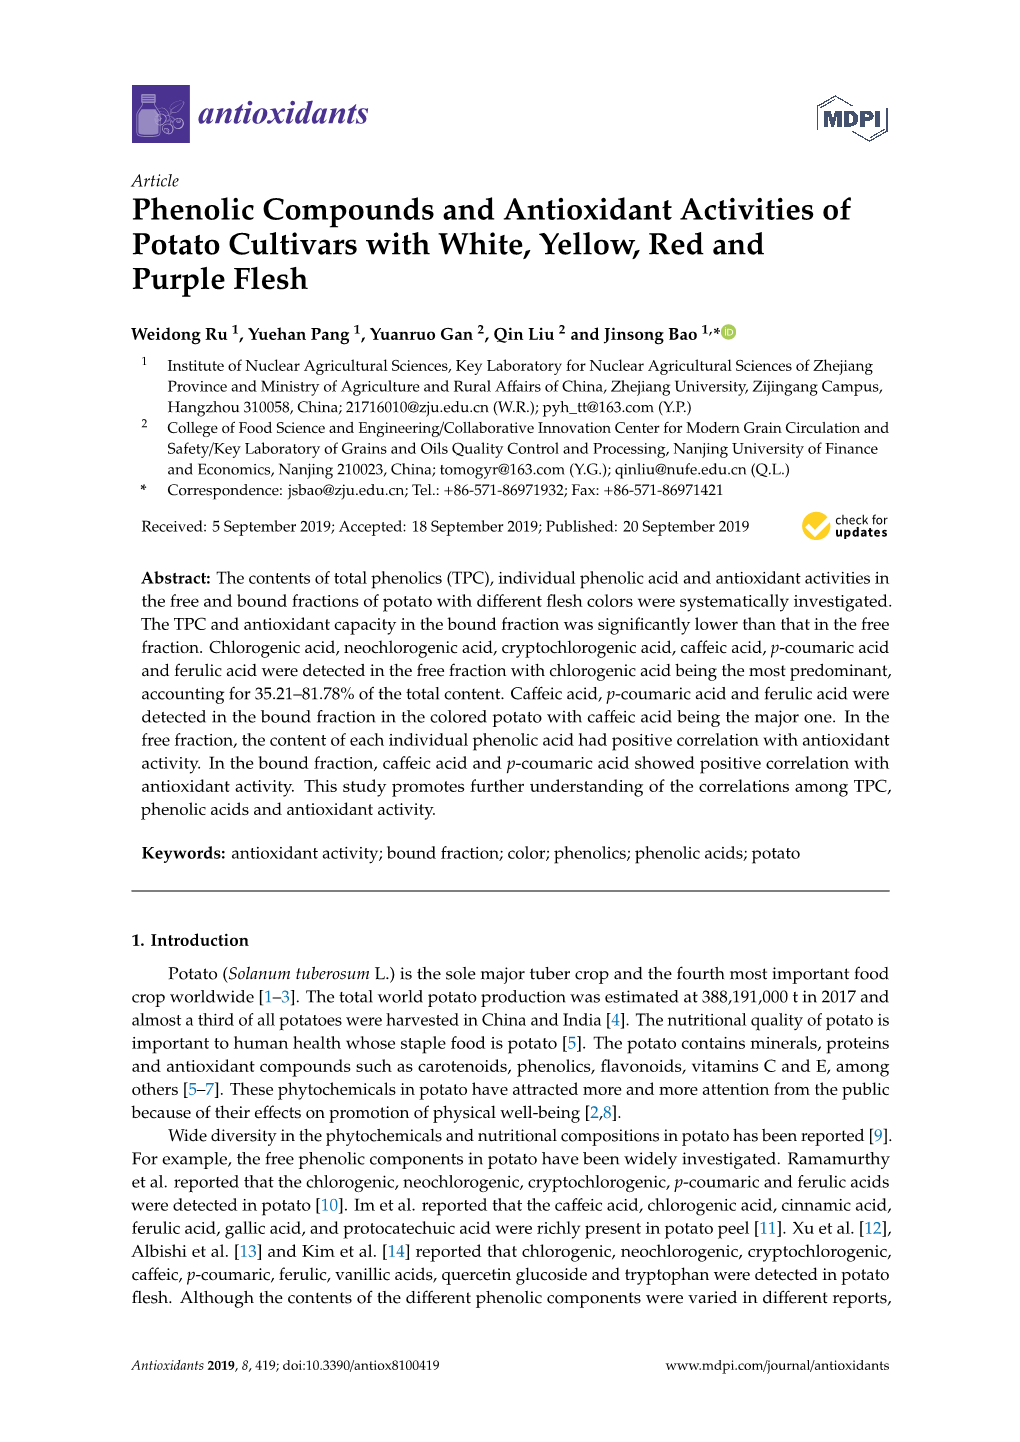 Phenolic Compounds and Antioxidant Activities of Potato Cultivars with White, Yellow, Red and Purple Flesh